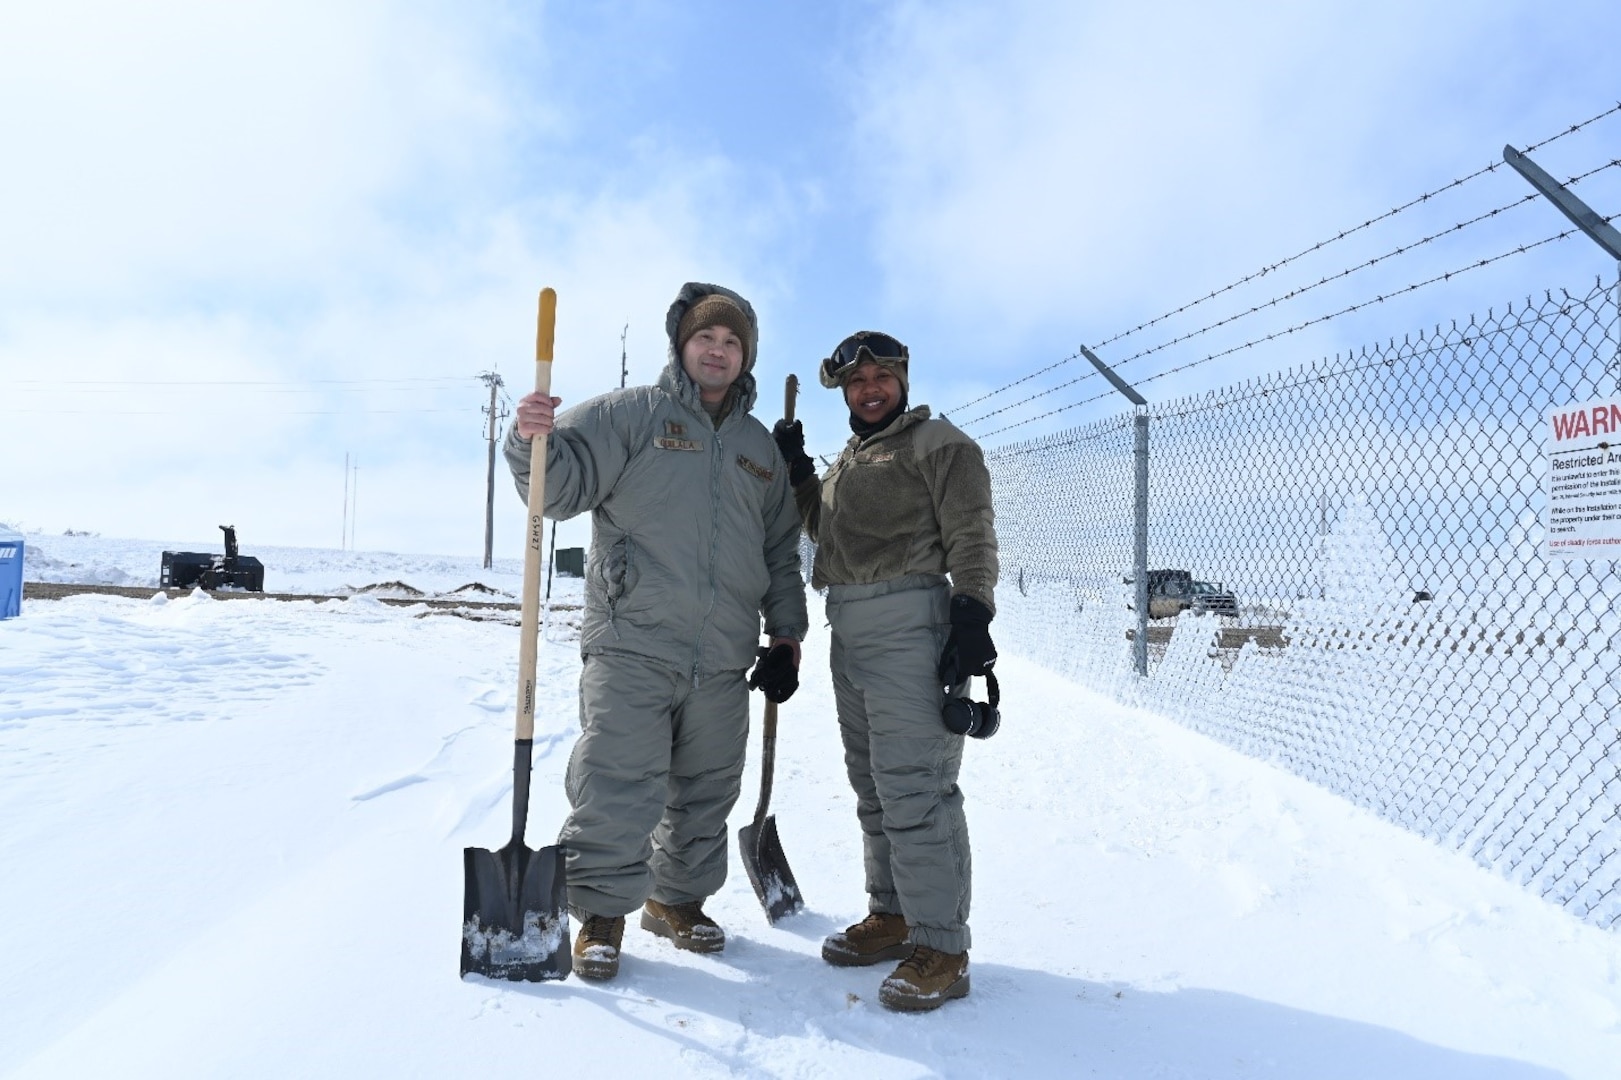 Two Airmen pose for a photo together on Minot Air Force Base, North Dakota, April 26, 2022. The Airmen were assisting in the shoveling of snow to create a trench to help water flow away from a missile launch facility. (U.S. Air Force photo by Senior Airman Caleb Kimmell)